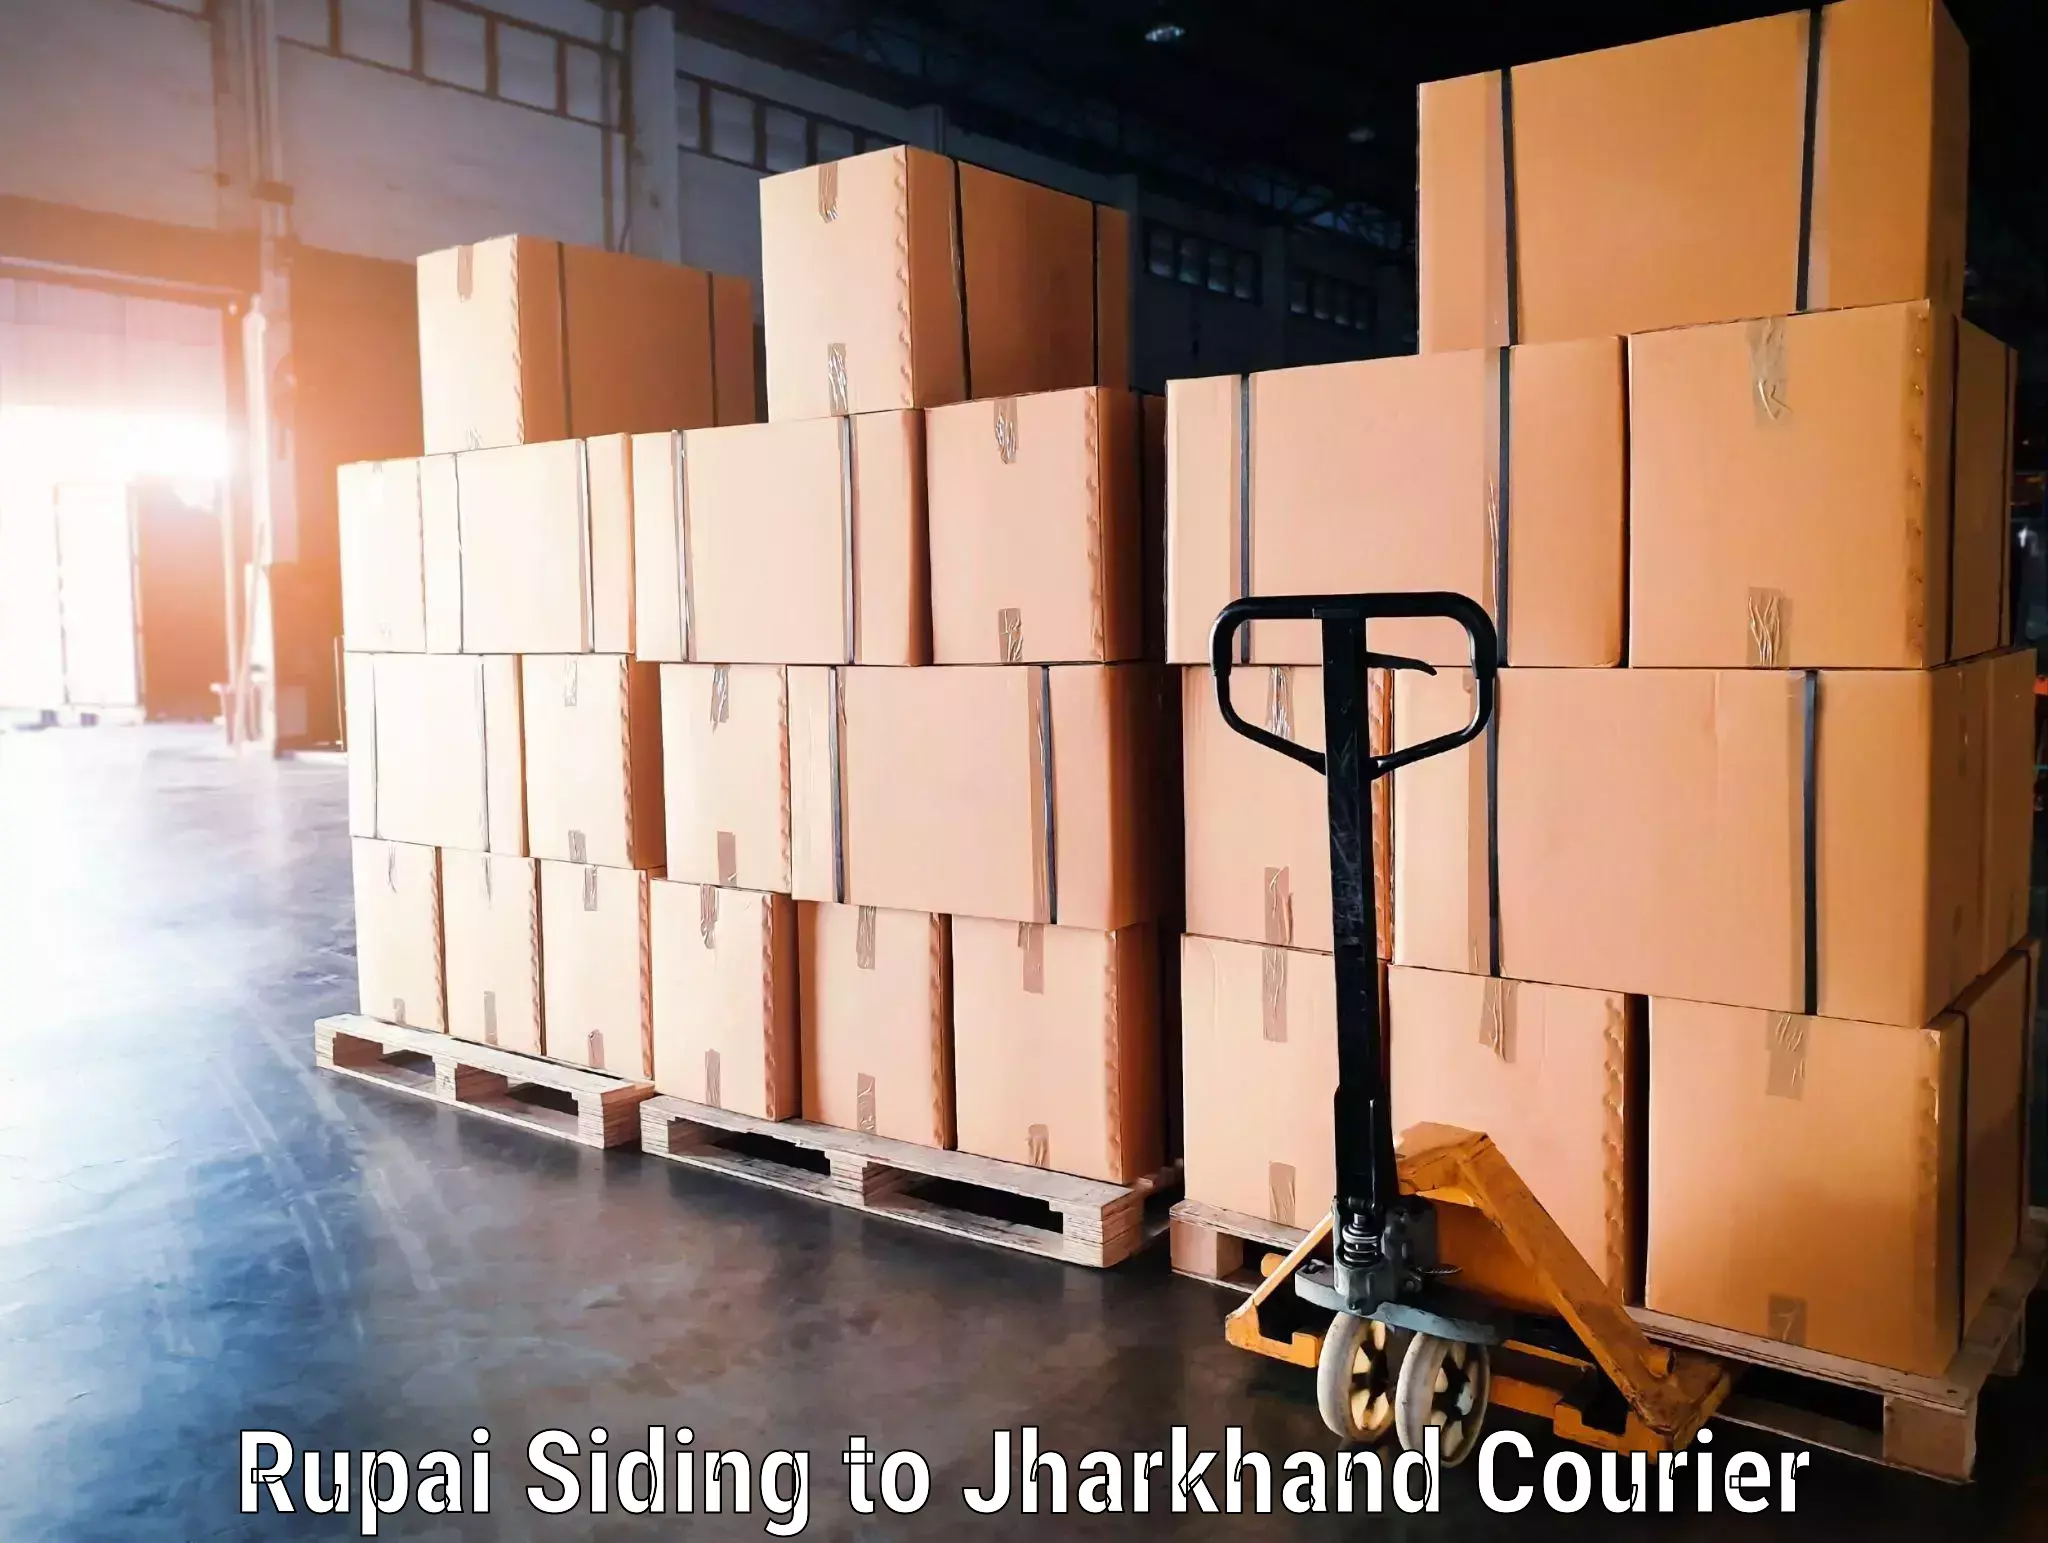 Baggage transport network Rupai Siding to Chandil